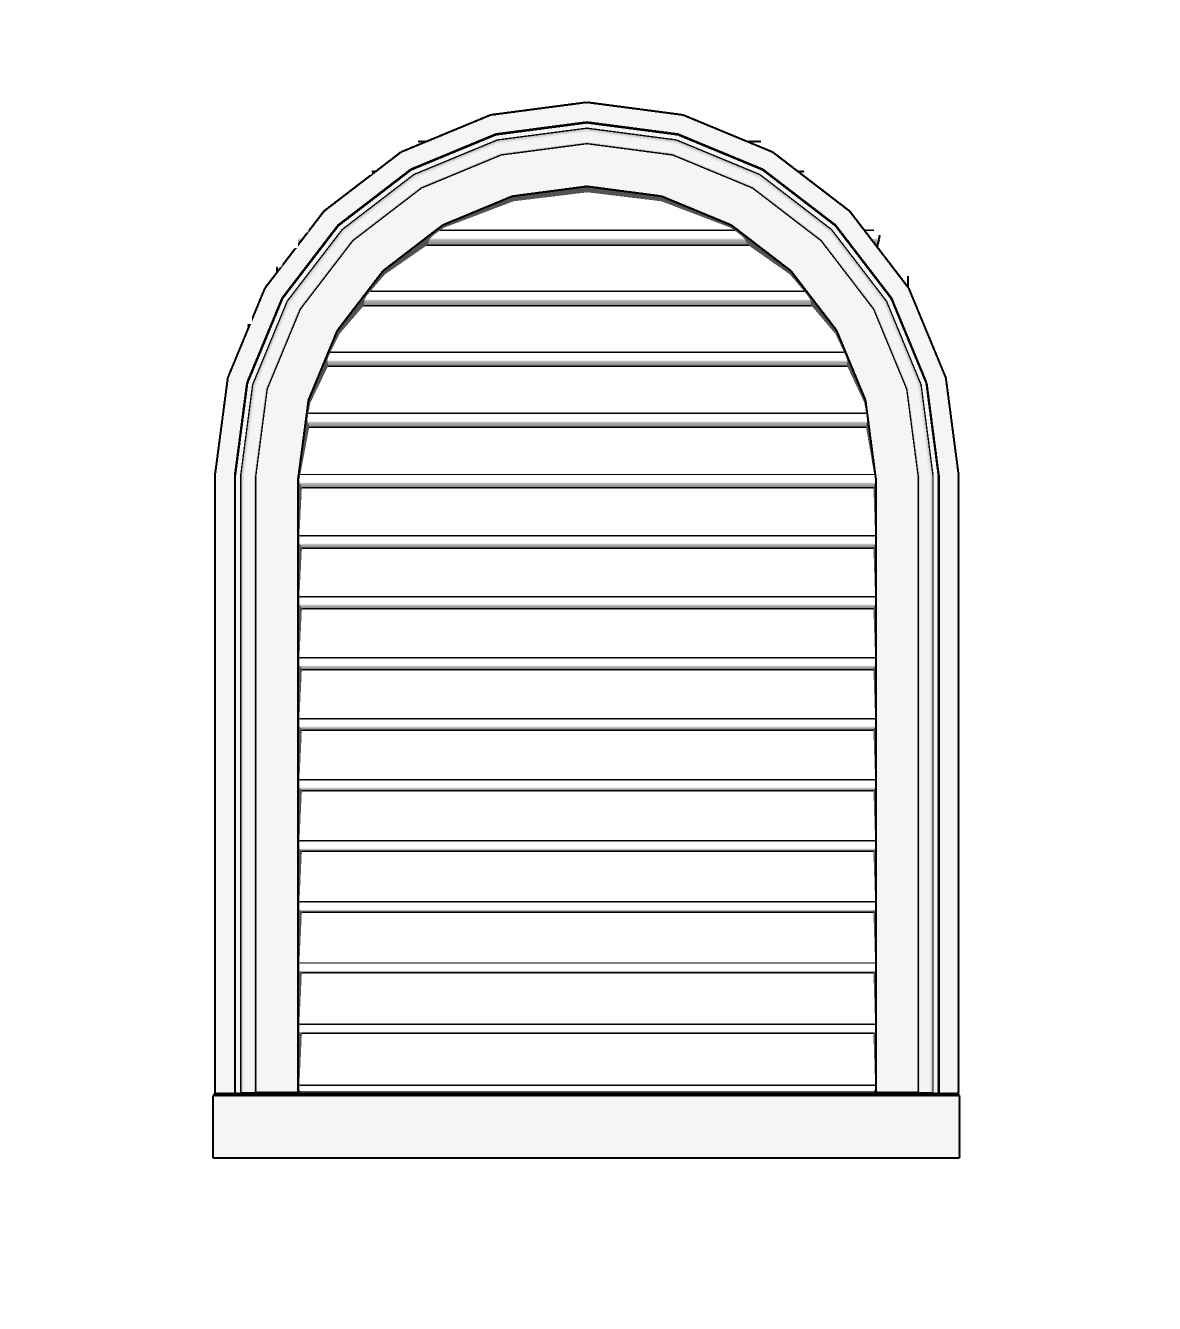 Cathedral Louver - Decorative, Brickmould Style